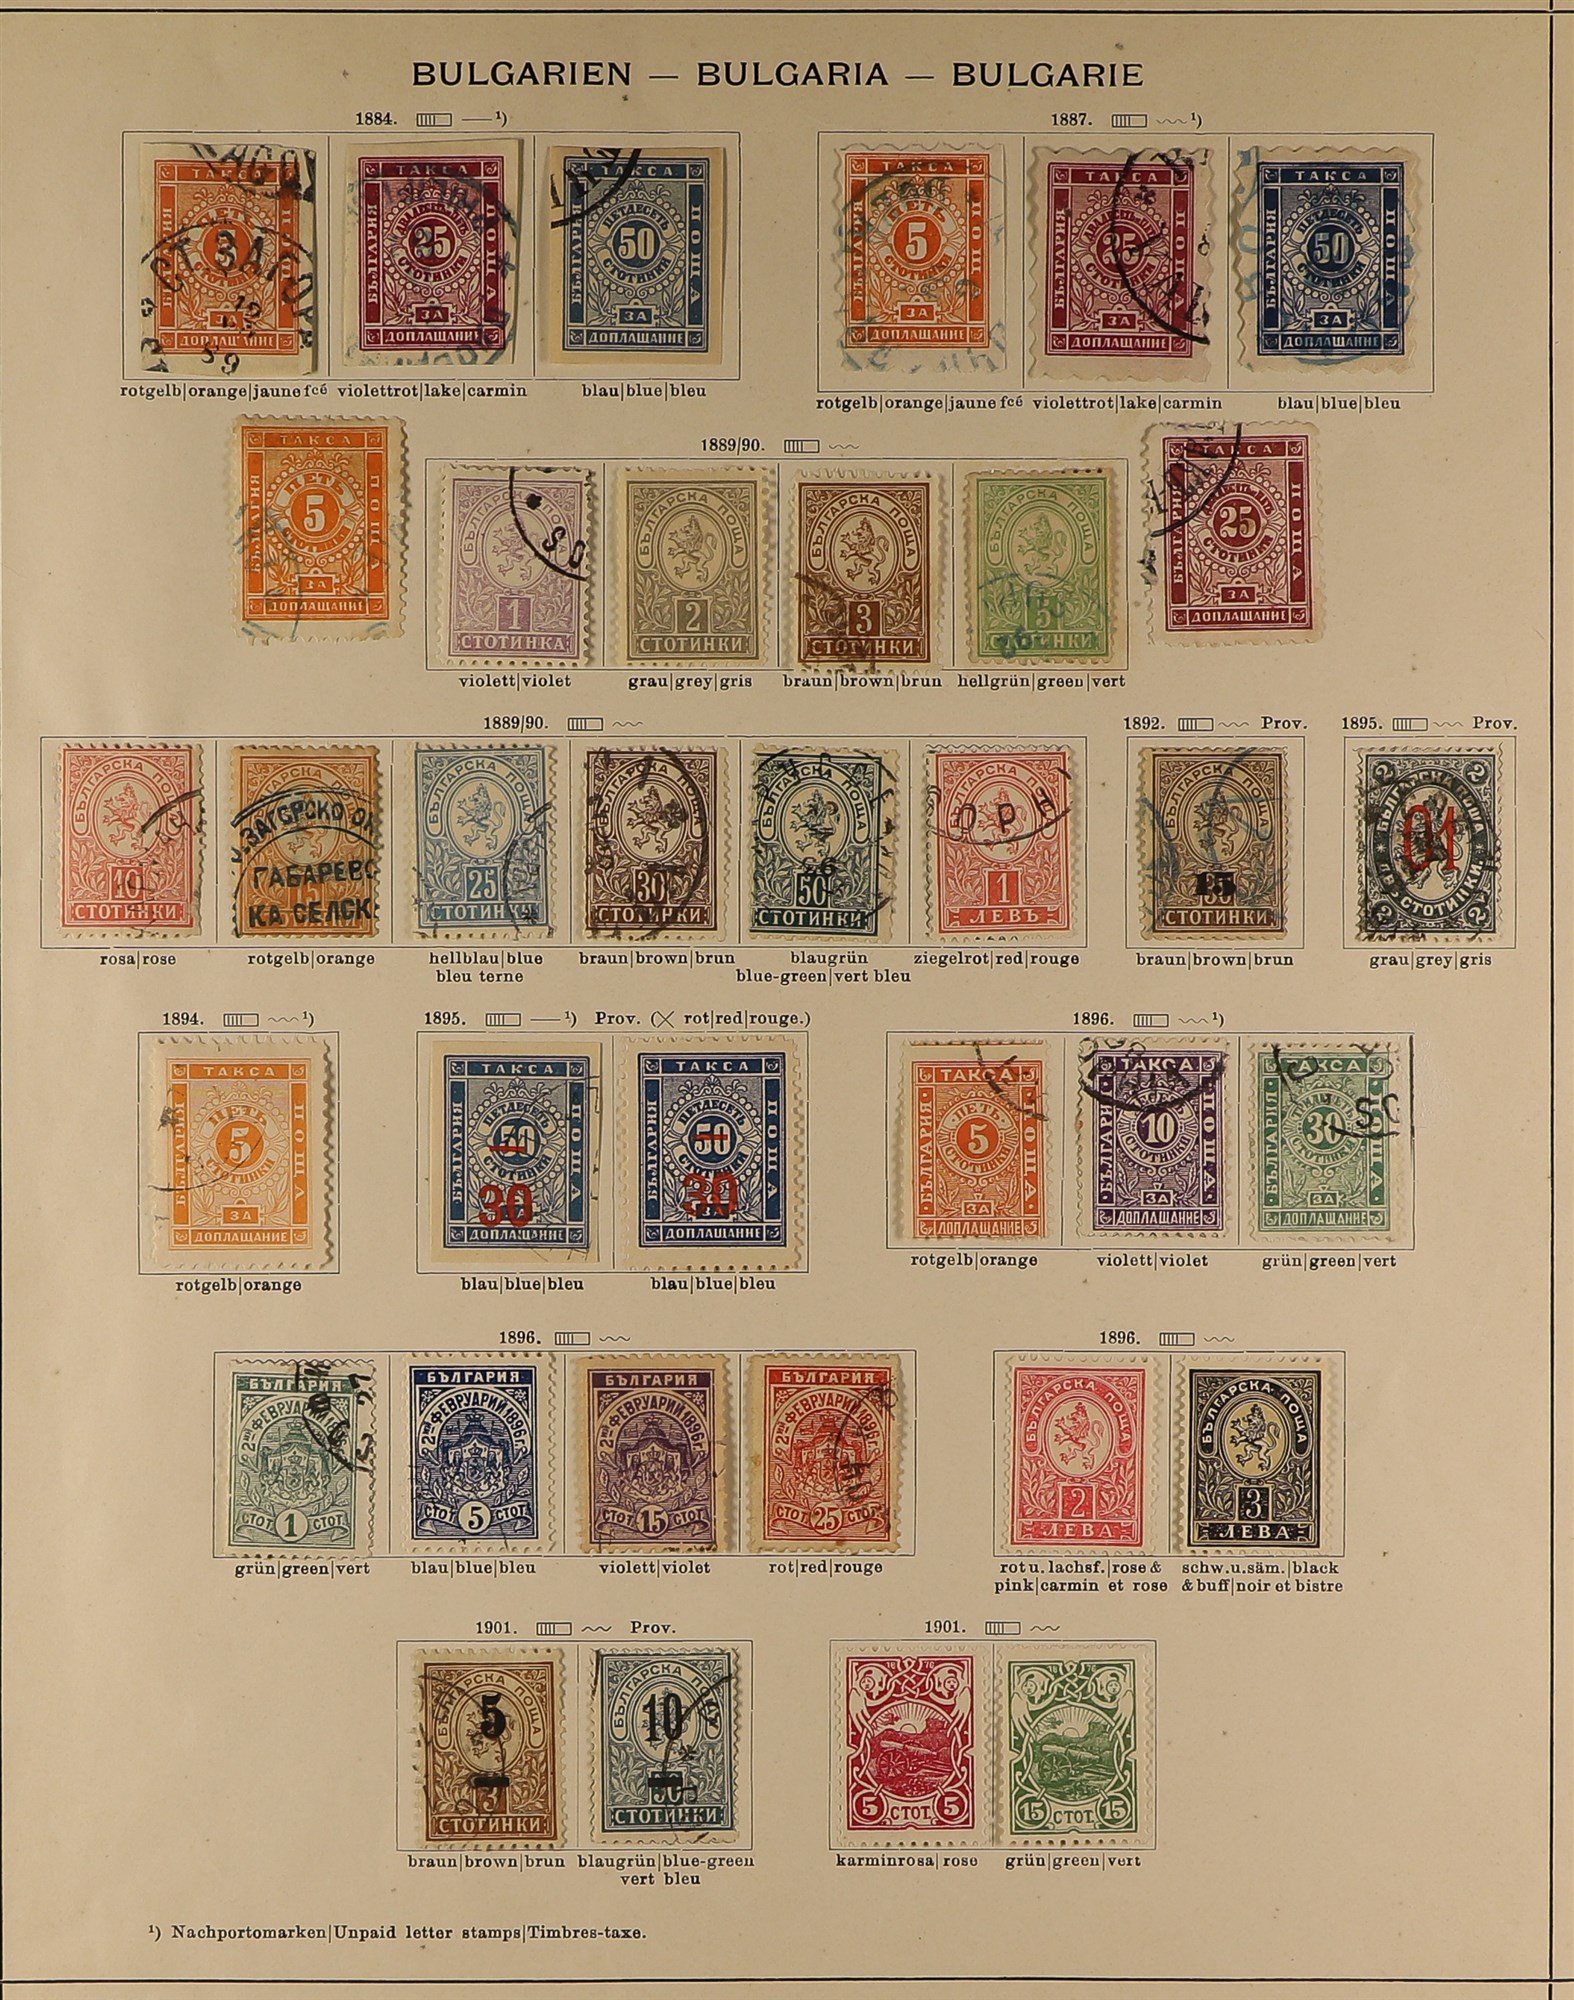 BULGARIA 1879 - 1901 COLLECTION near- complete run of postage & postage due stamps (60+ stamps) - Image 2 of 2